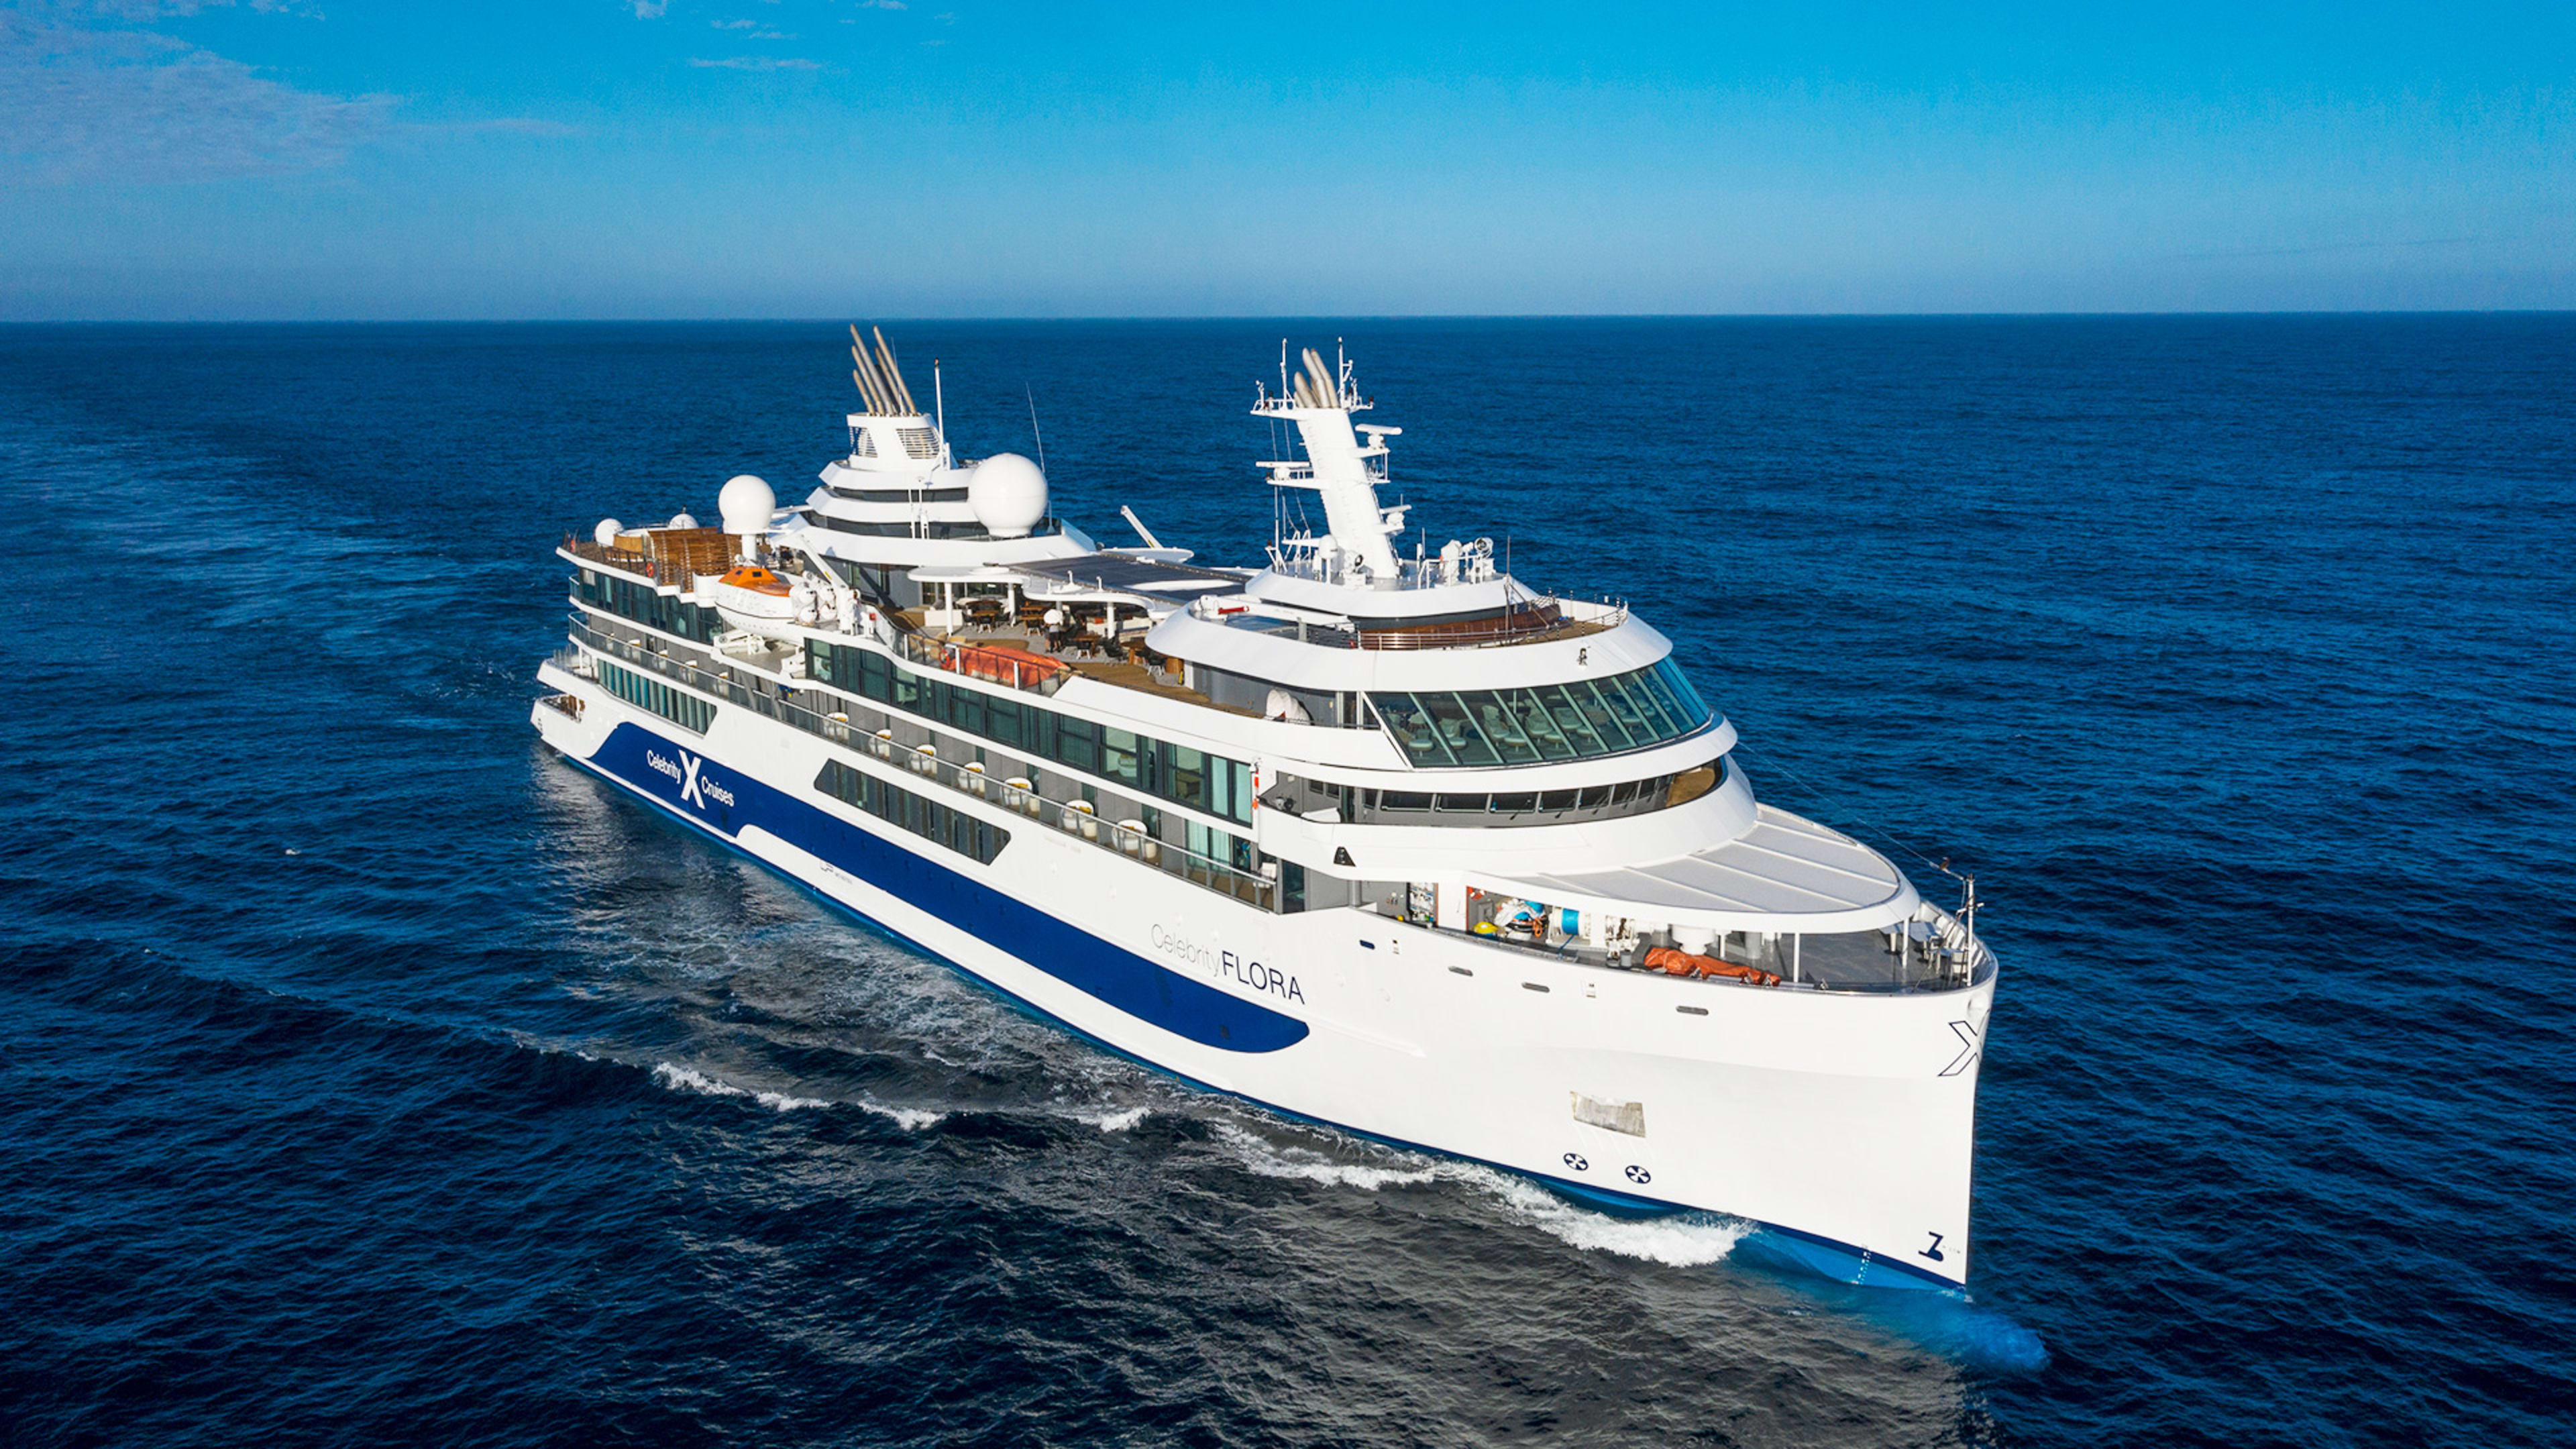 Celebrity Cruise’s Flora is an eco-friendly bet the company can turn the tide on cruising